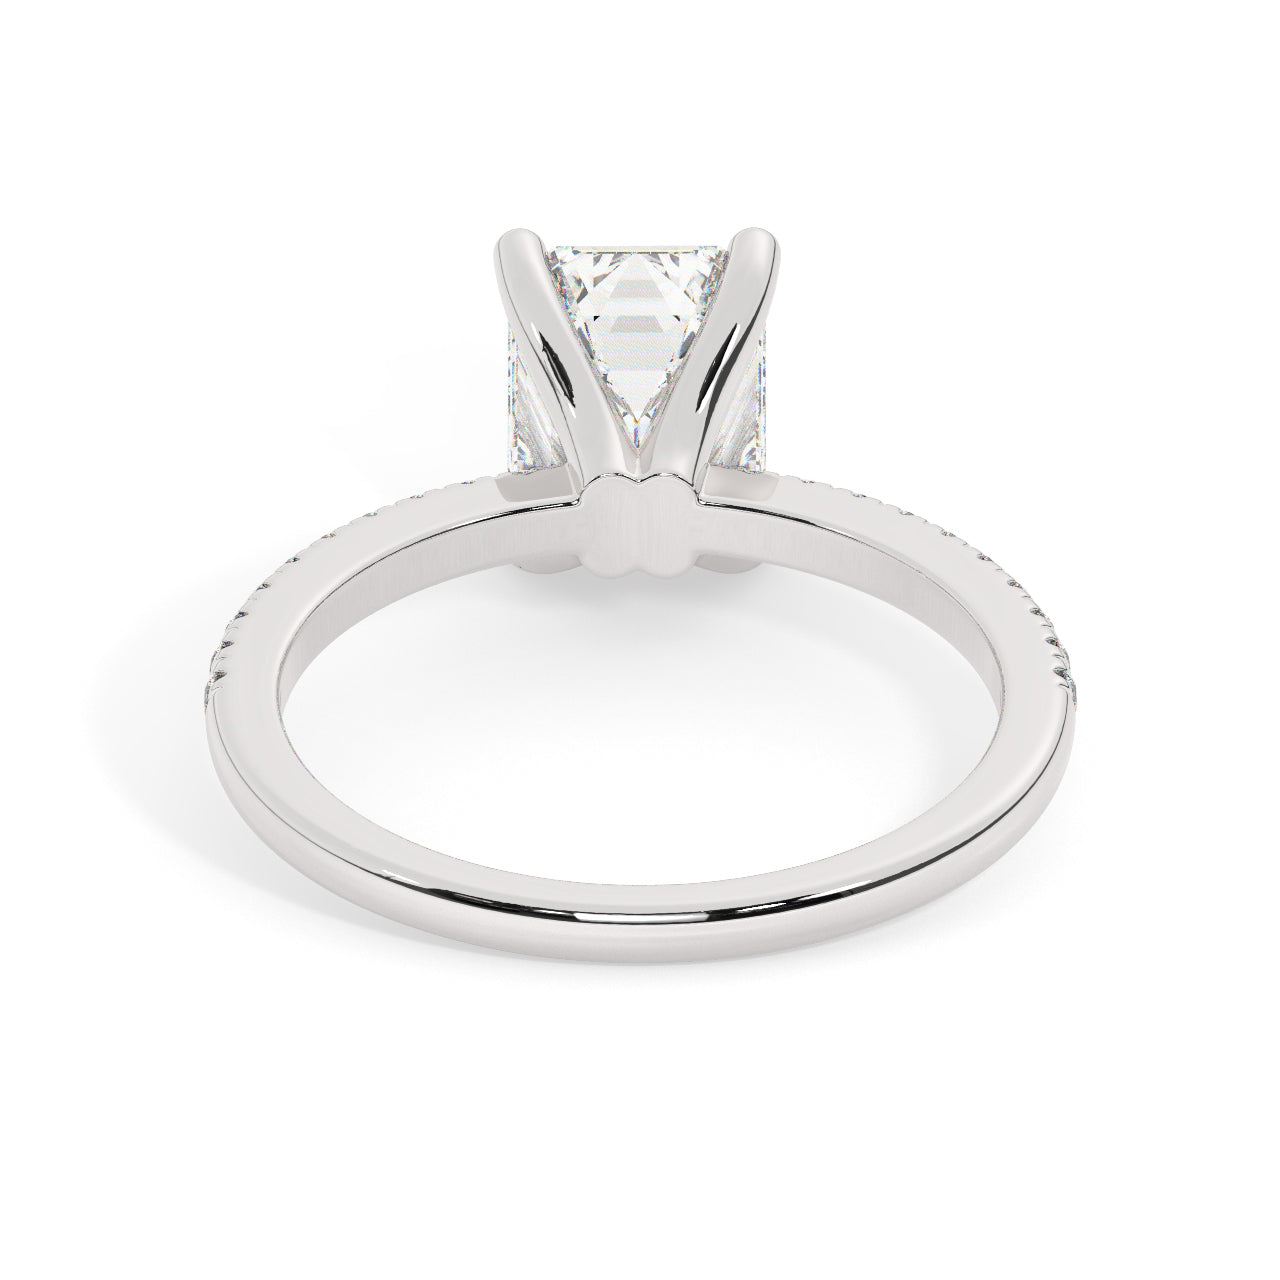 White Gold Emerald Cut Engagement Ring set on a Pavé Band - Back View